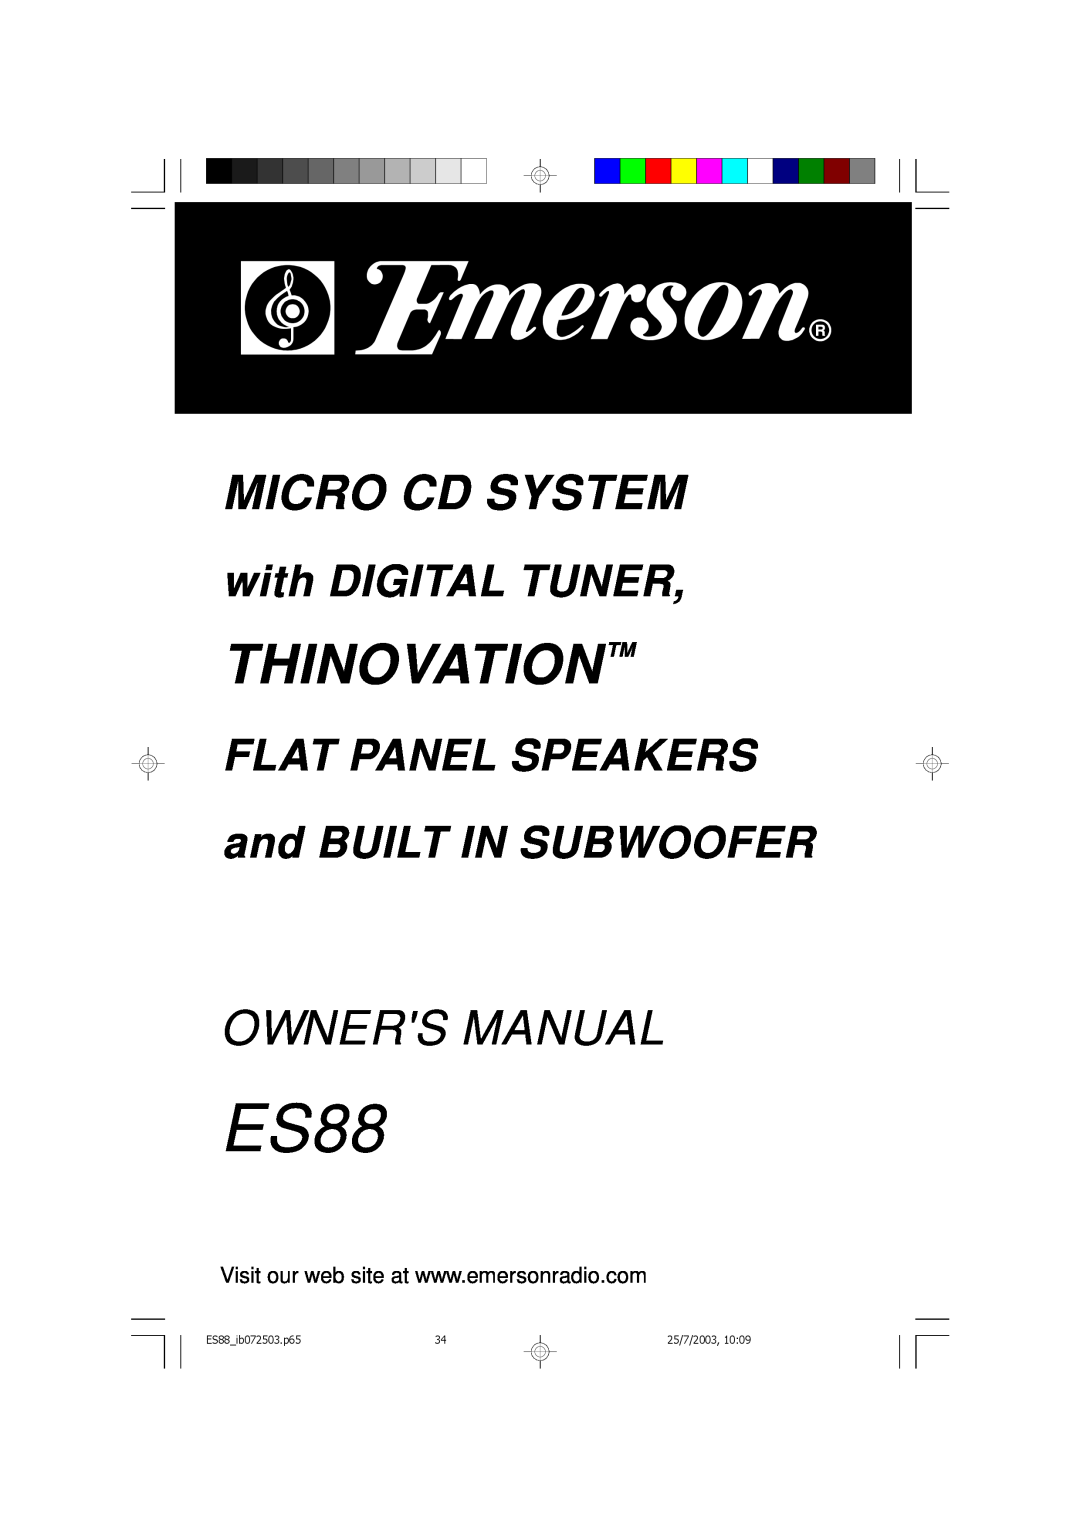 Emerson ES88 owner manual Thinovation, Micro Cd System, with DIGITAL TUNER, FLAT PANEL SPEAKERS and BUILT IN SUBWOOFER 